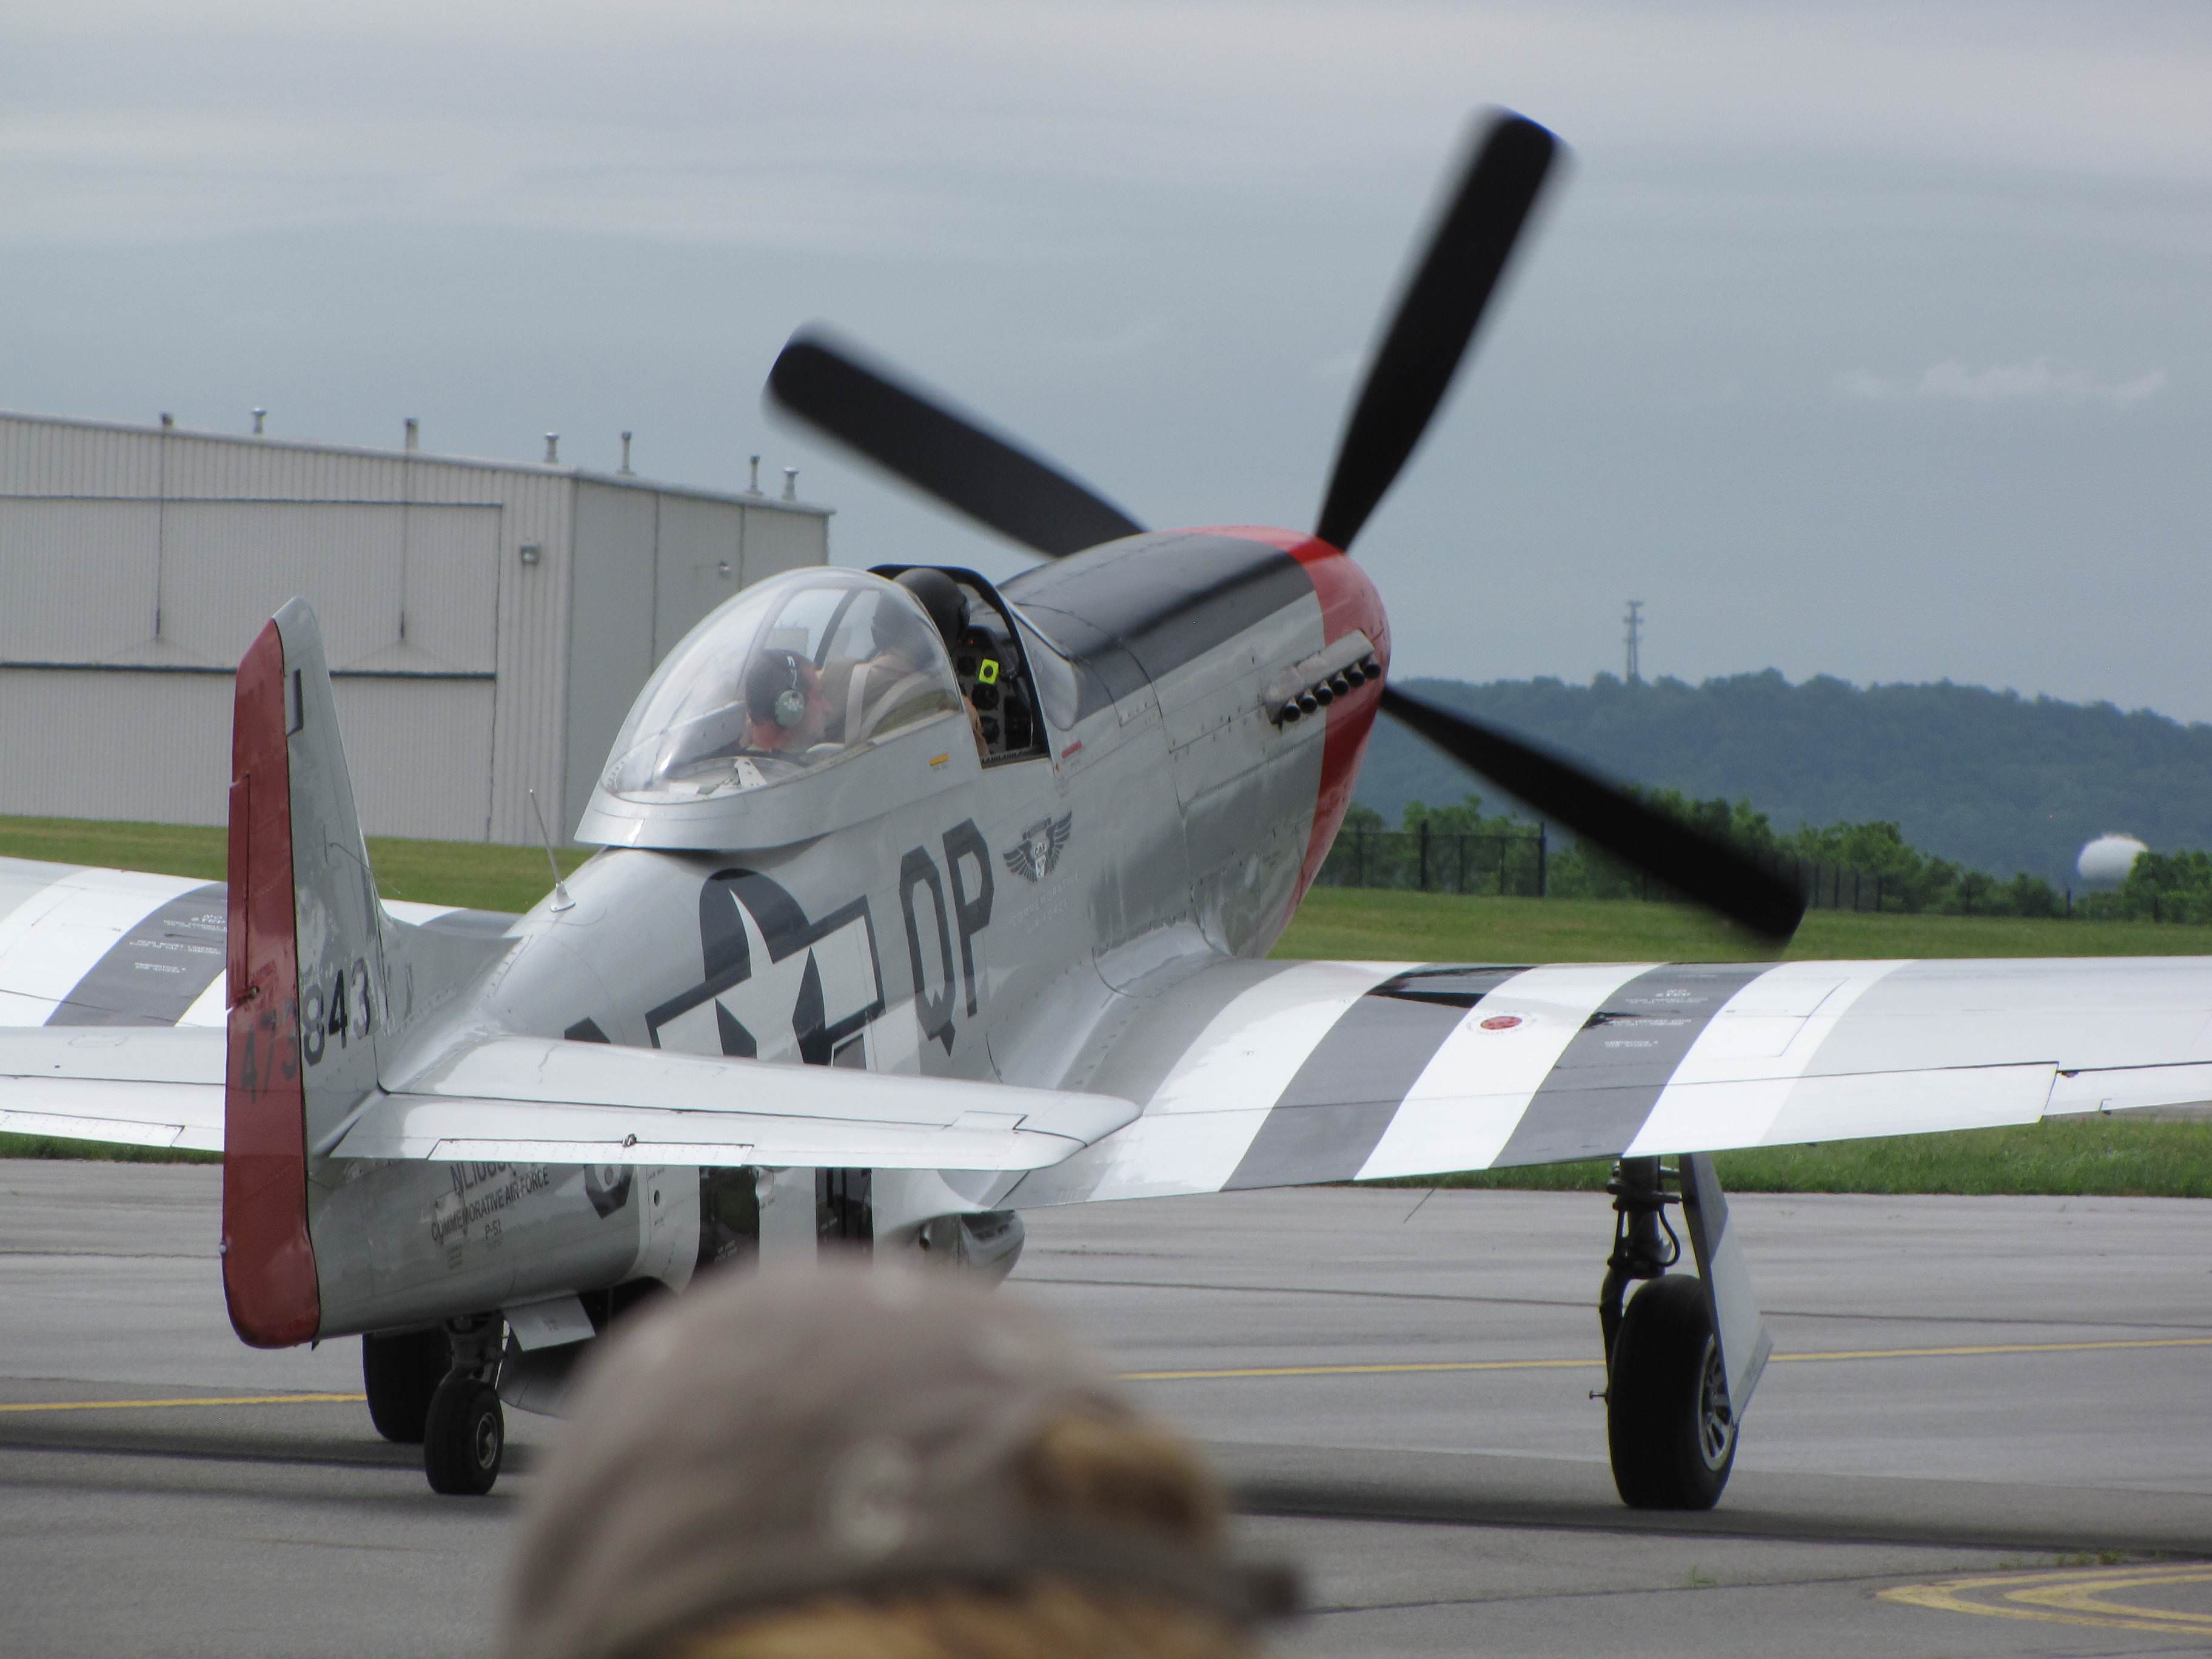 P-51 Mustang fighter at rest, Reading Regional Airport, Pennsylvania, United States, 3 Jun 2018, photo 1 of 2